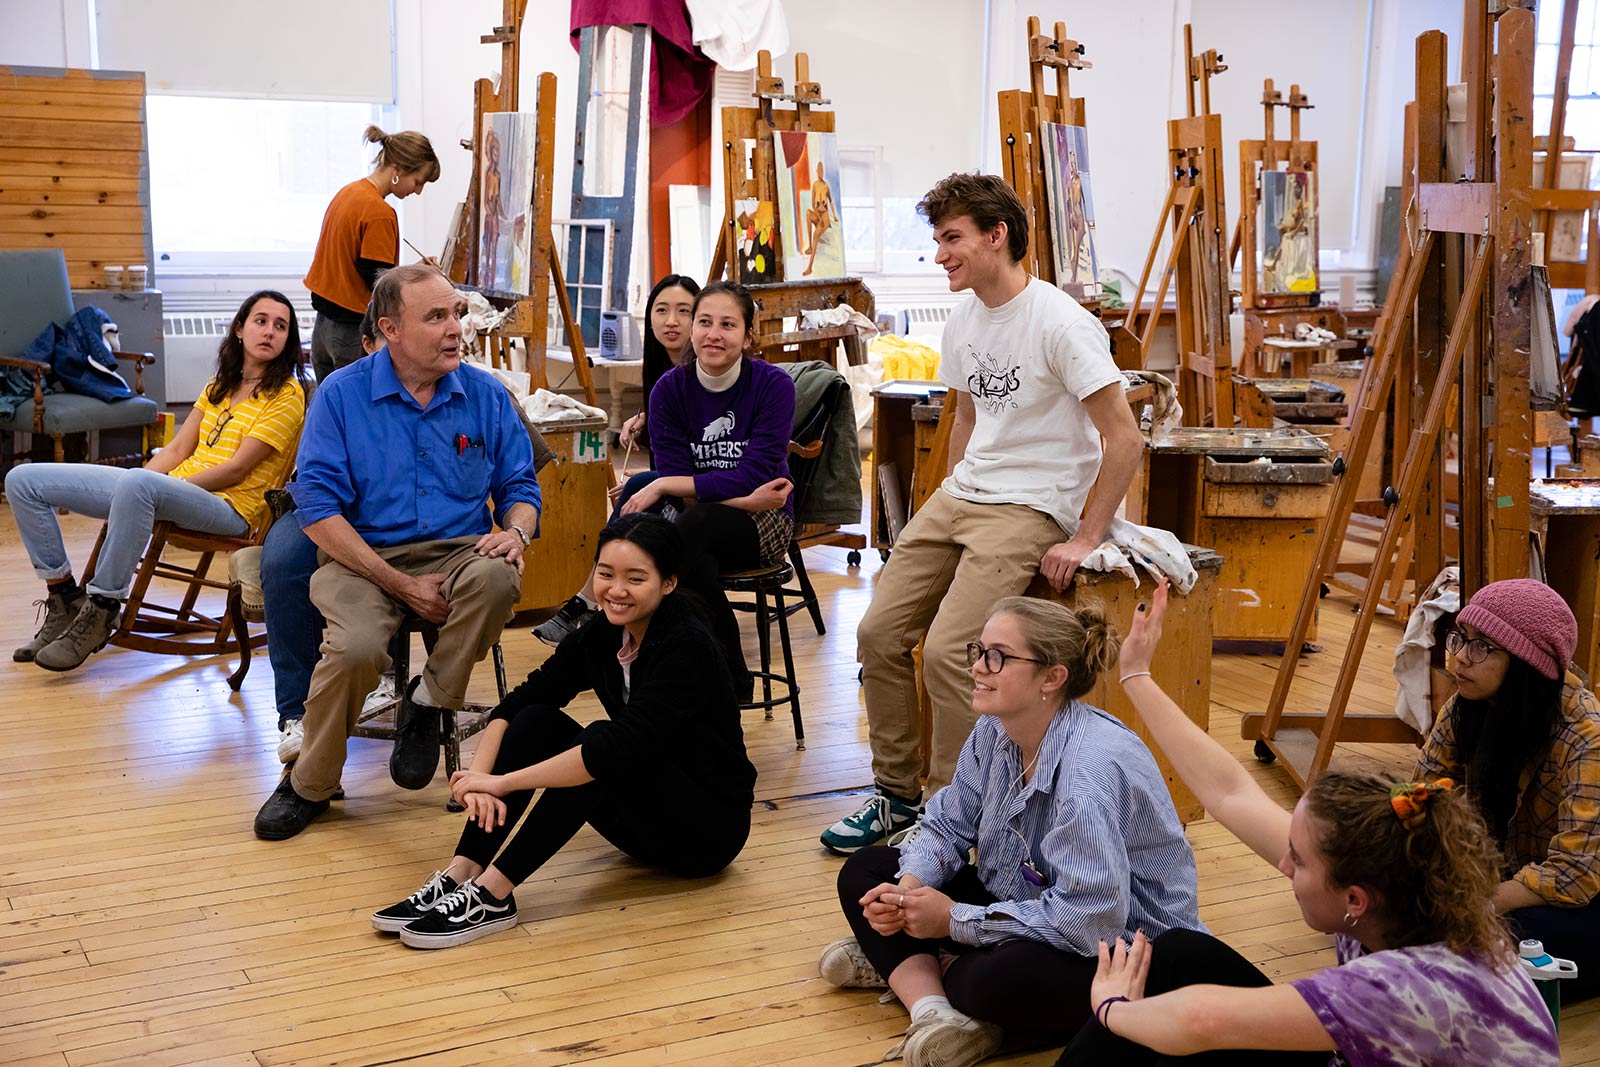 Professor Robert Sweeney talking with a group of student in the painting studio